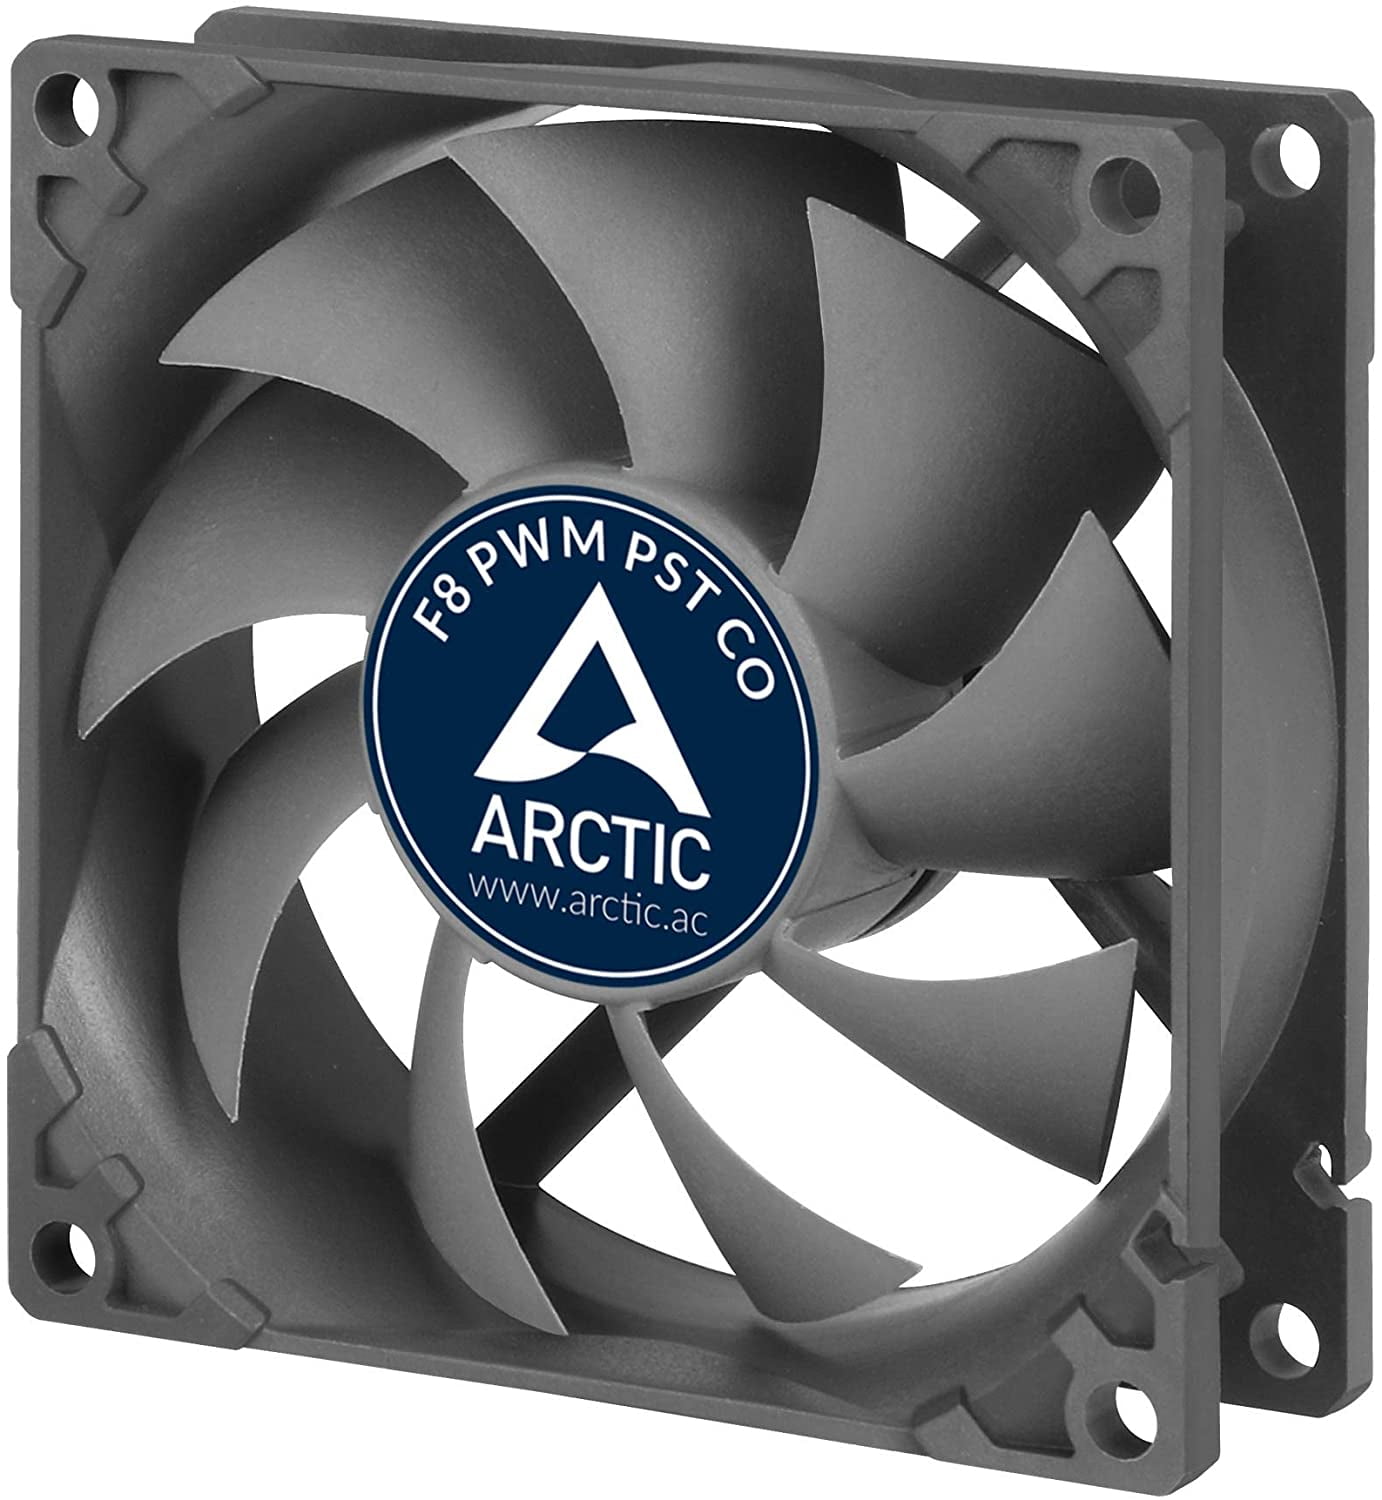 Arctic F8 Pwm Pst Co 80 Mm Pwm Pst Case Fan For Continuous Operation